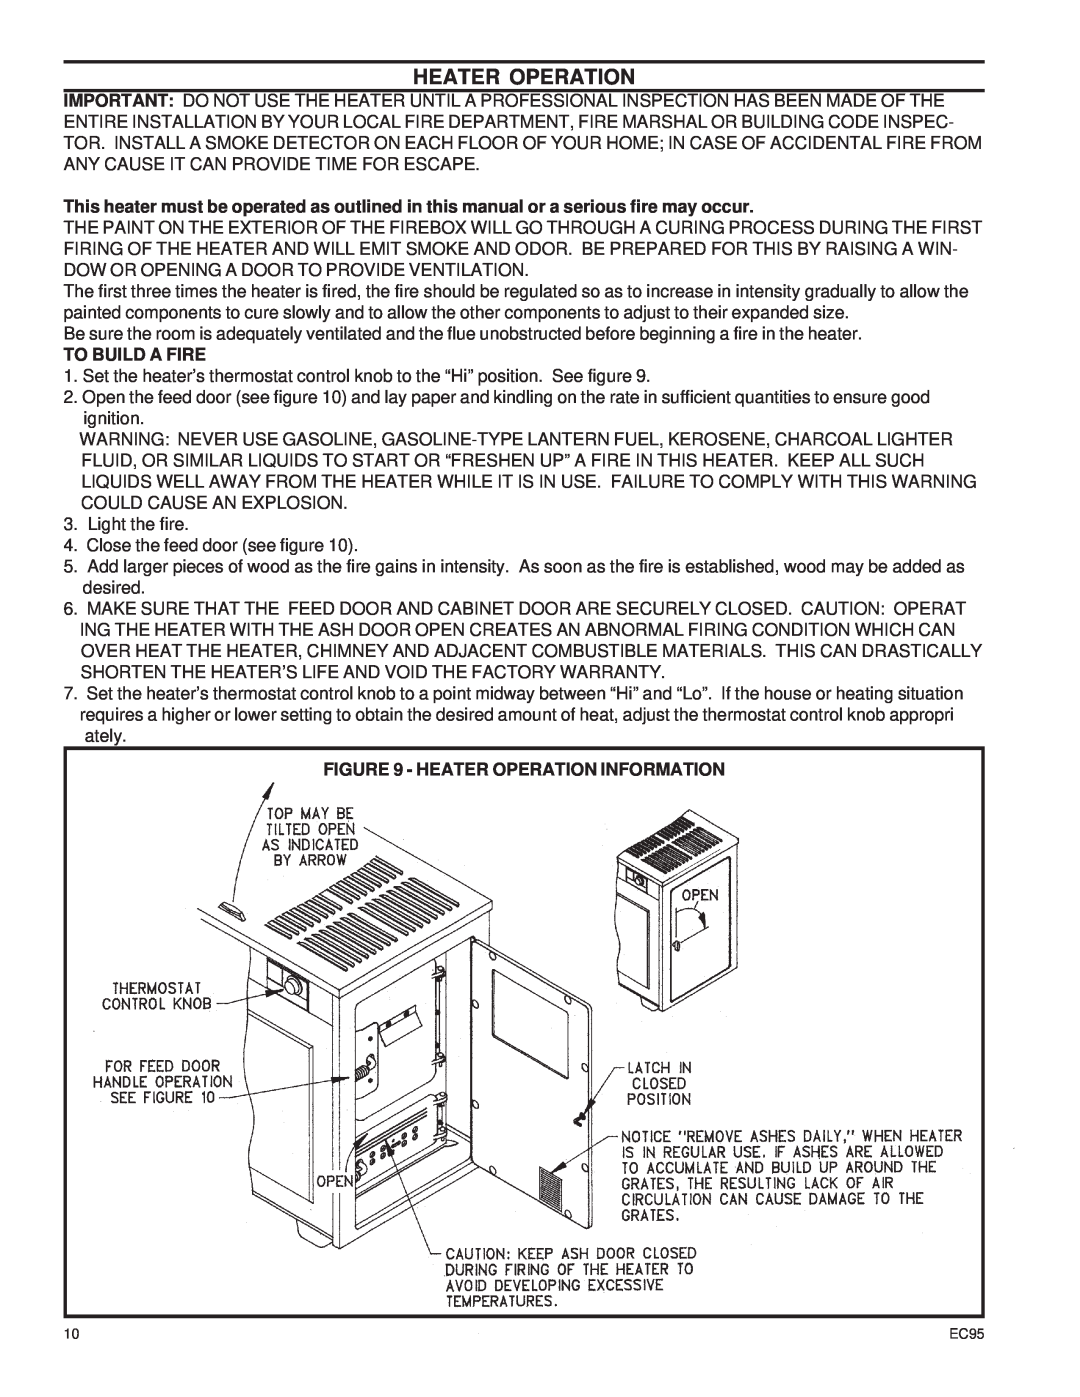 United States Stove EC95 warranty To Build A Fire, Heater Operation Information 